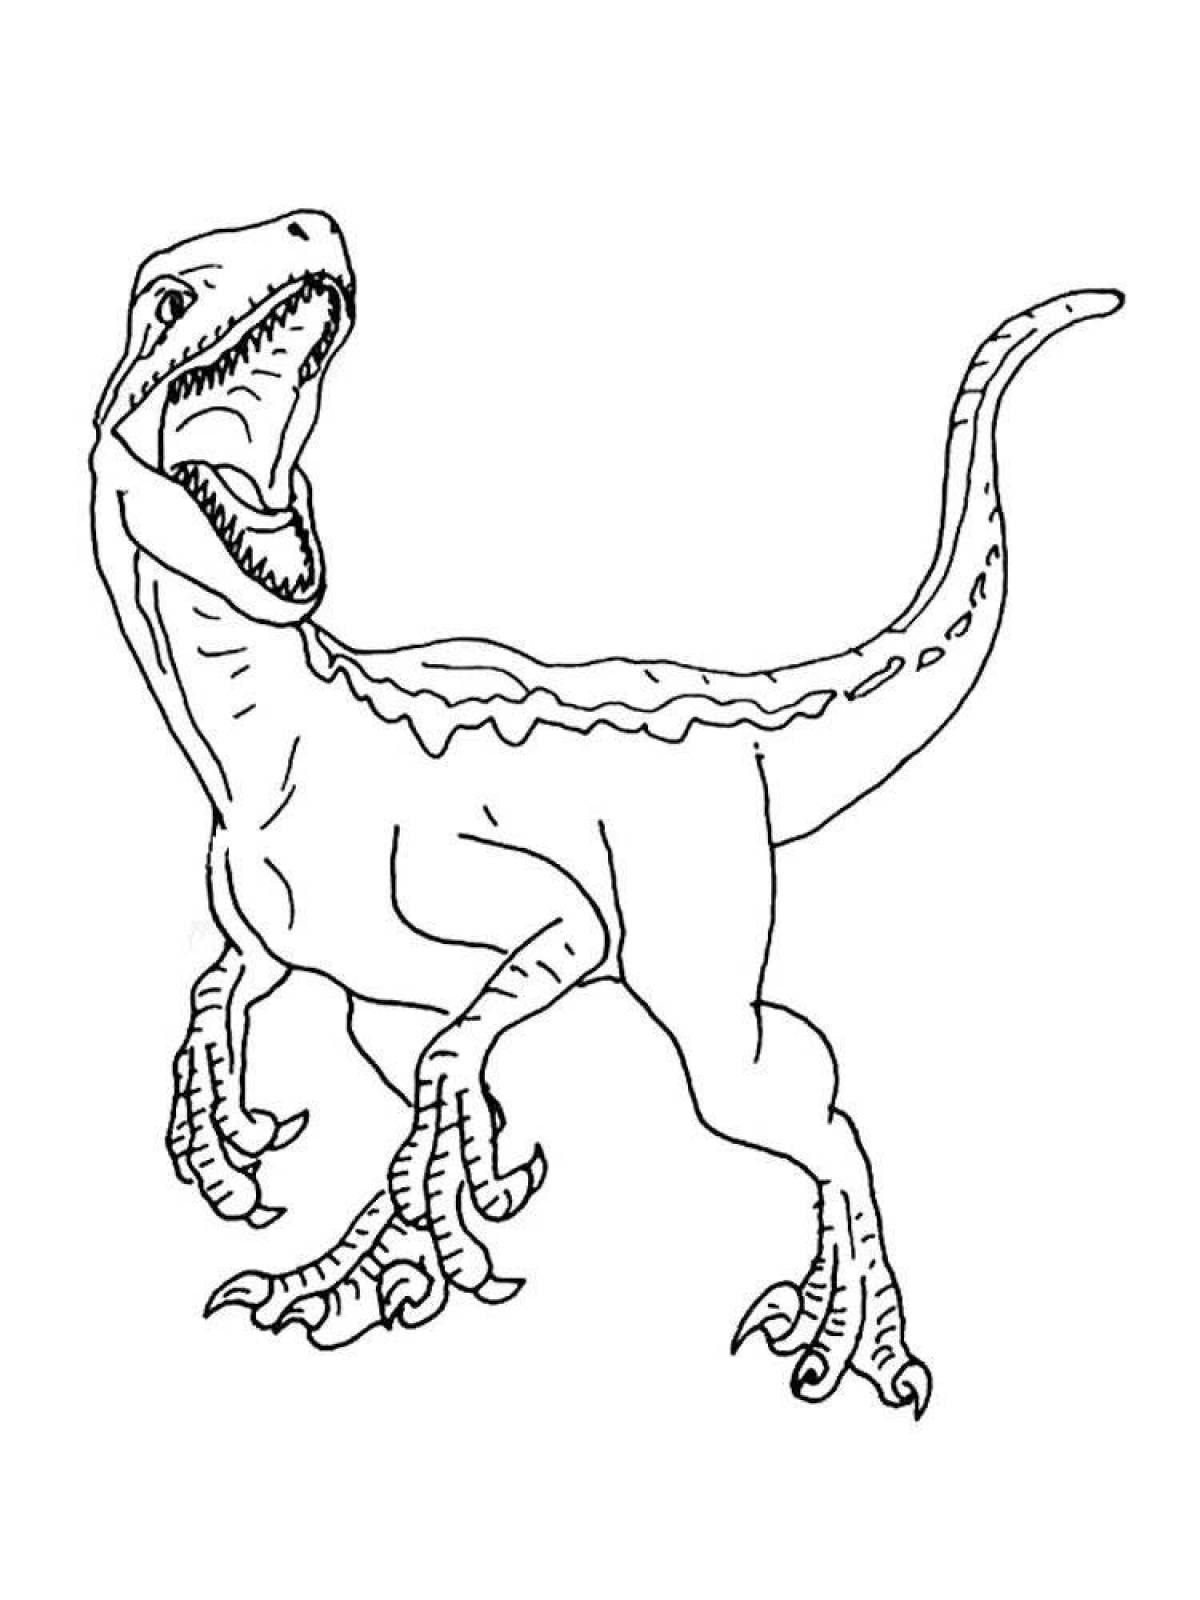 Coloring page cheerful velociraptor